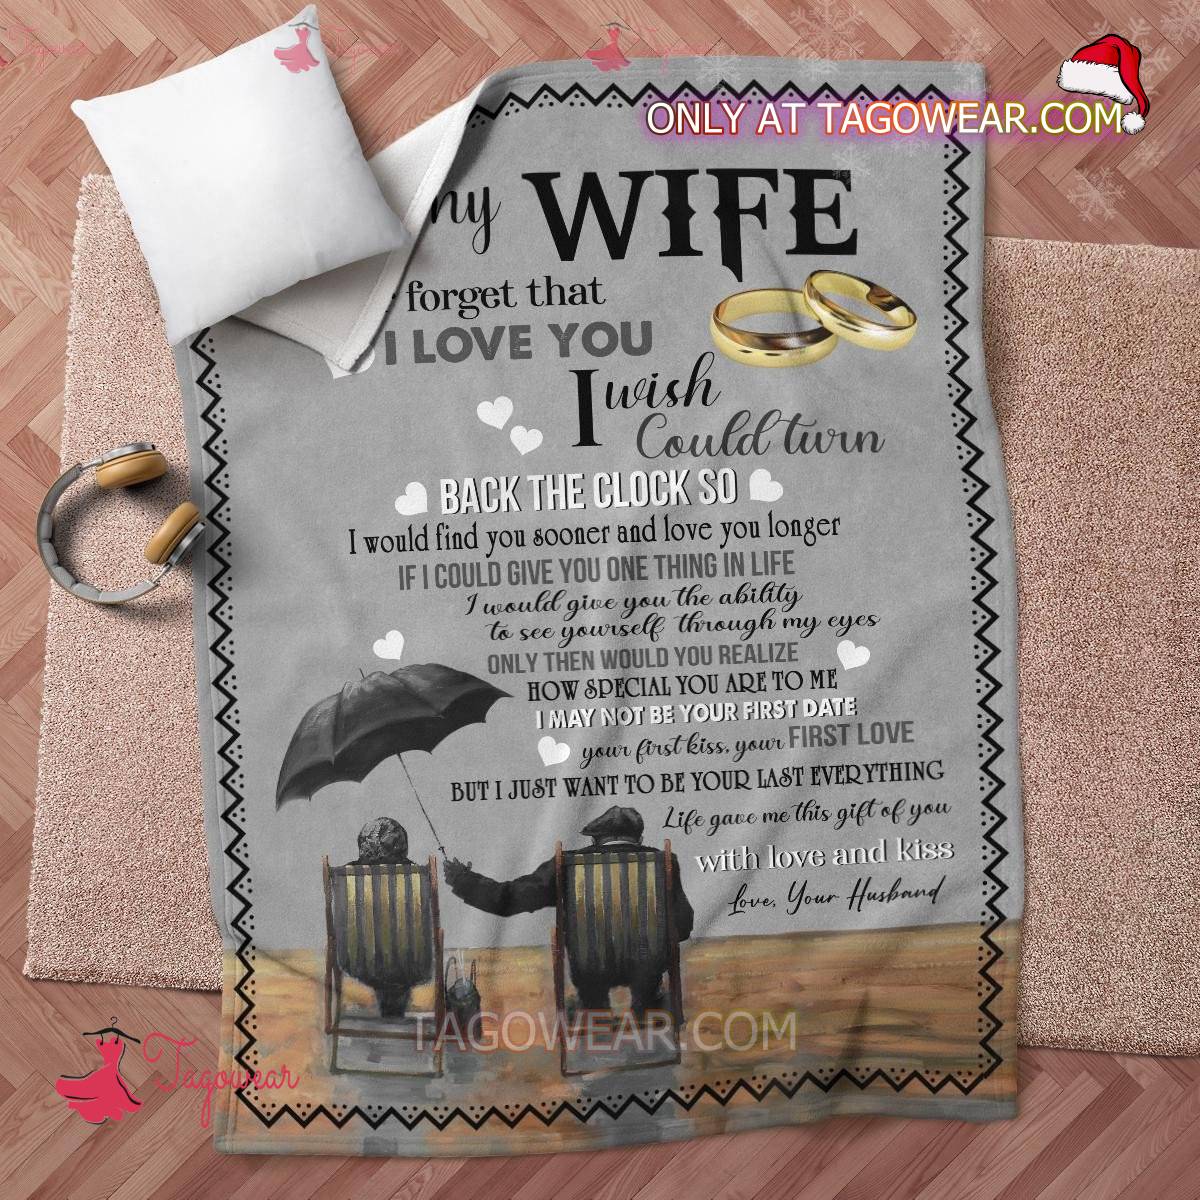 To My Wife Never Forget That I Love You I Wish Could Turn Blanket c